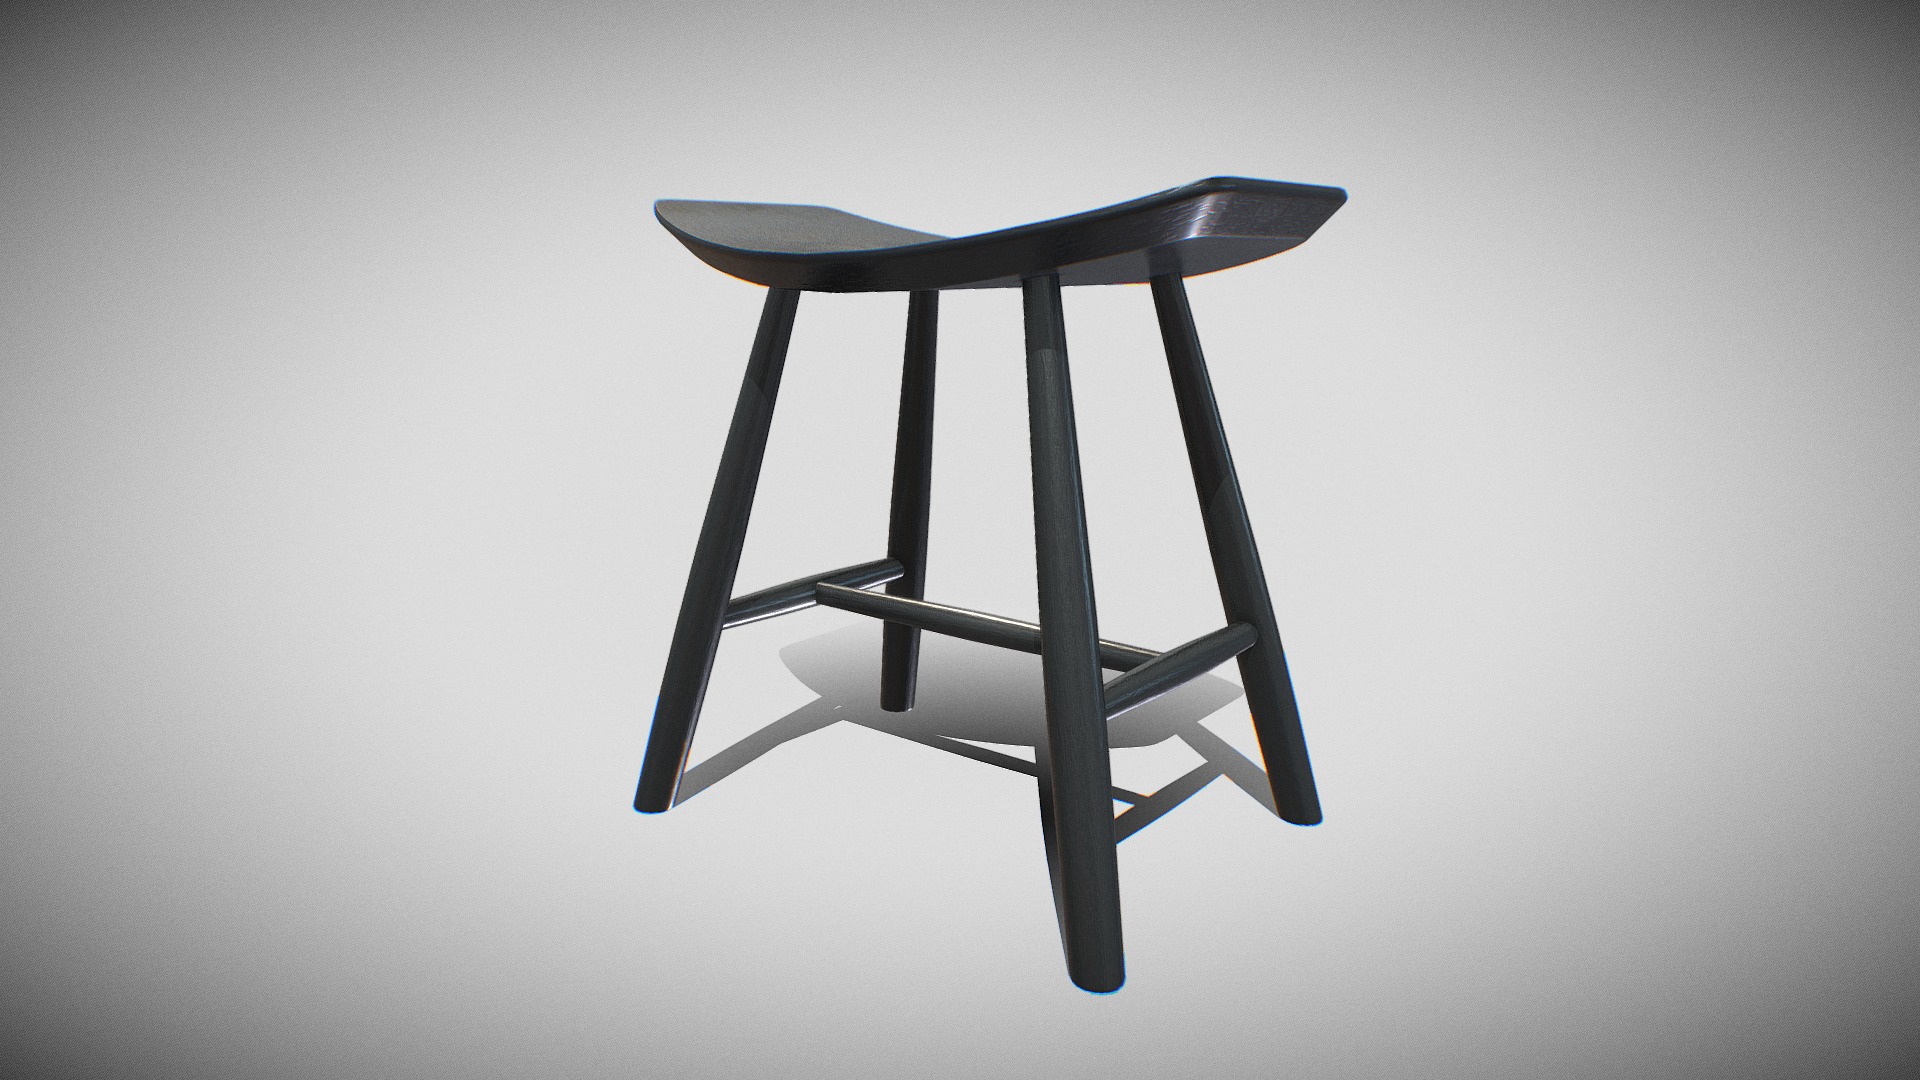 3D model Johansson J63 Stool-BlackAsh wood - This is a 3D model of the Johansson J63 Stool-BlackAsh wood. The 3D model is about a black chair with a table.